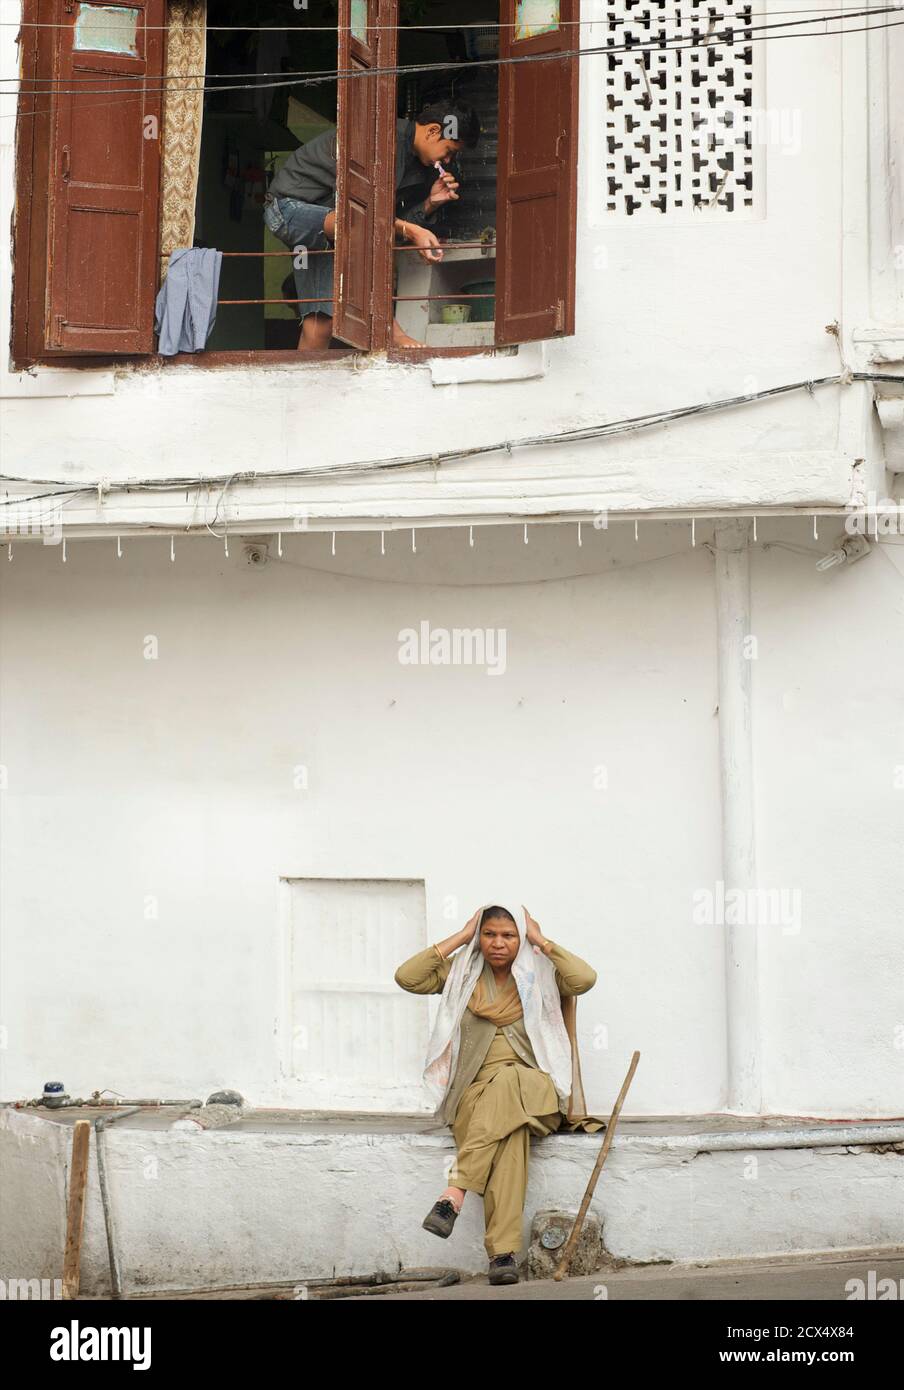 Candid scene. Indian woman drying hair and man brushing teeth above. Udaipur, Rajasthan, India Stock Photo